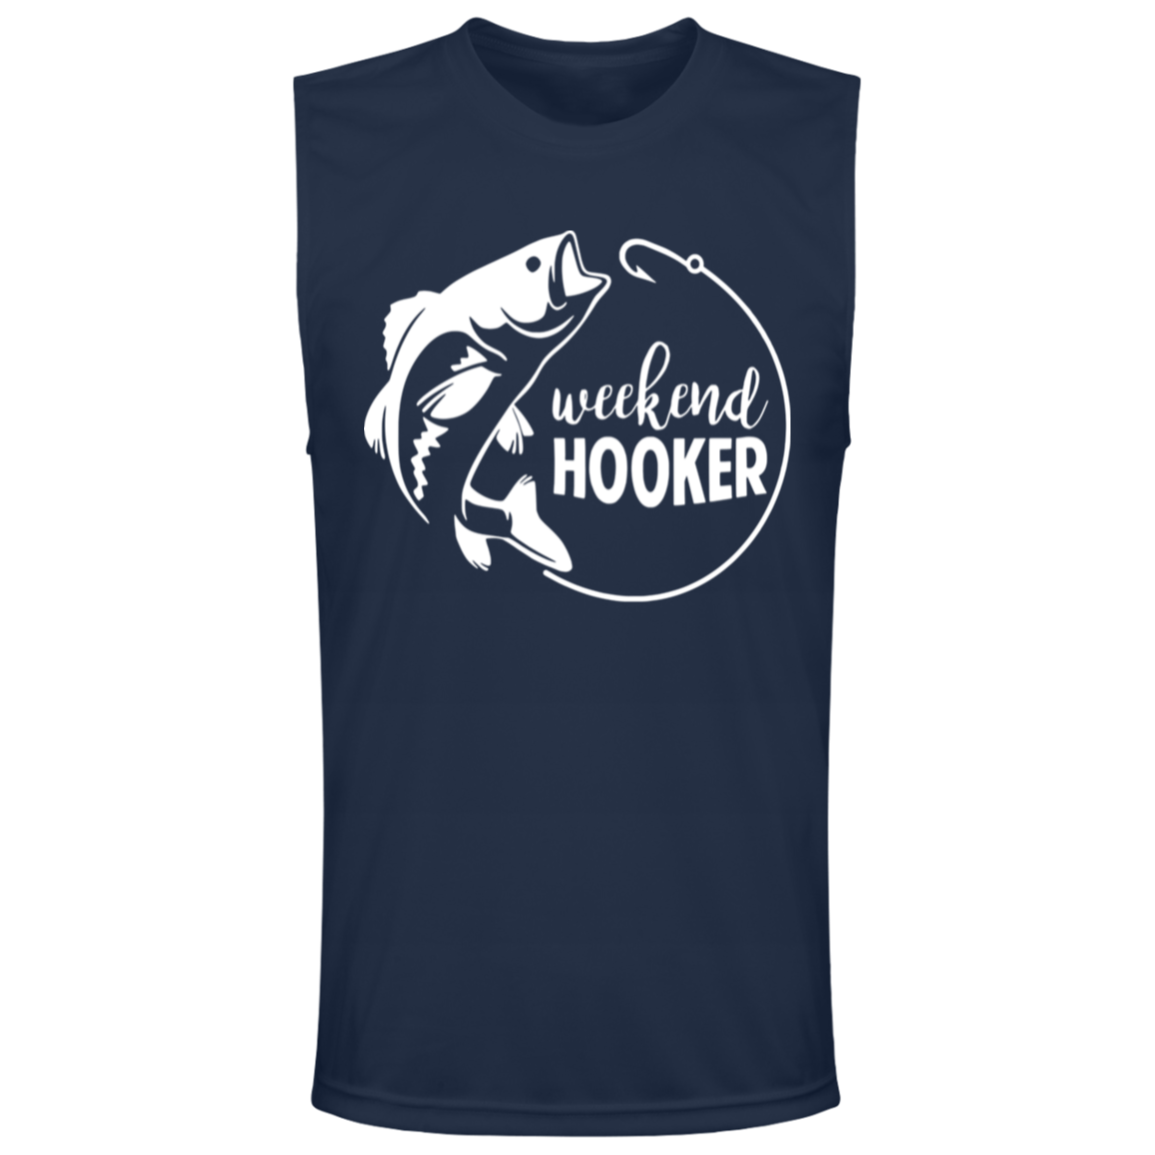 ***2 SIDED***  HRCL FL - Weekend Hooker - - 2 Sided - UV 40+ Protection TT11M Team 365 Mens Zone Muscle Tee